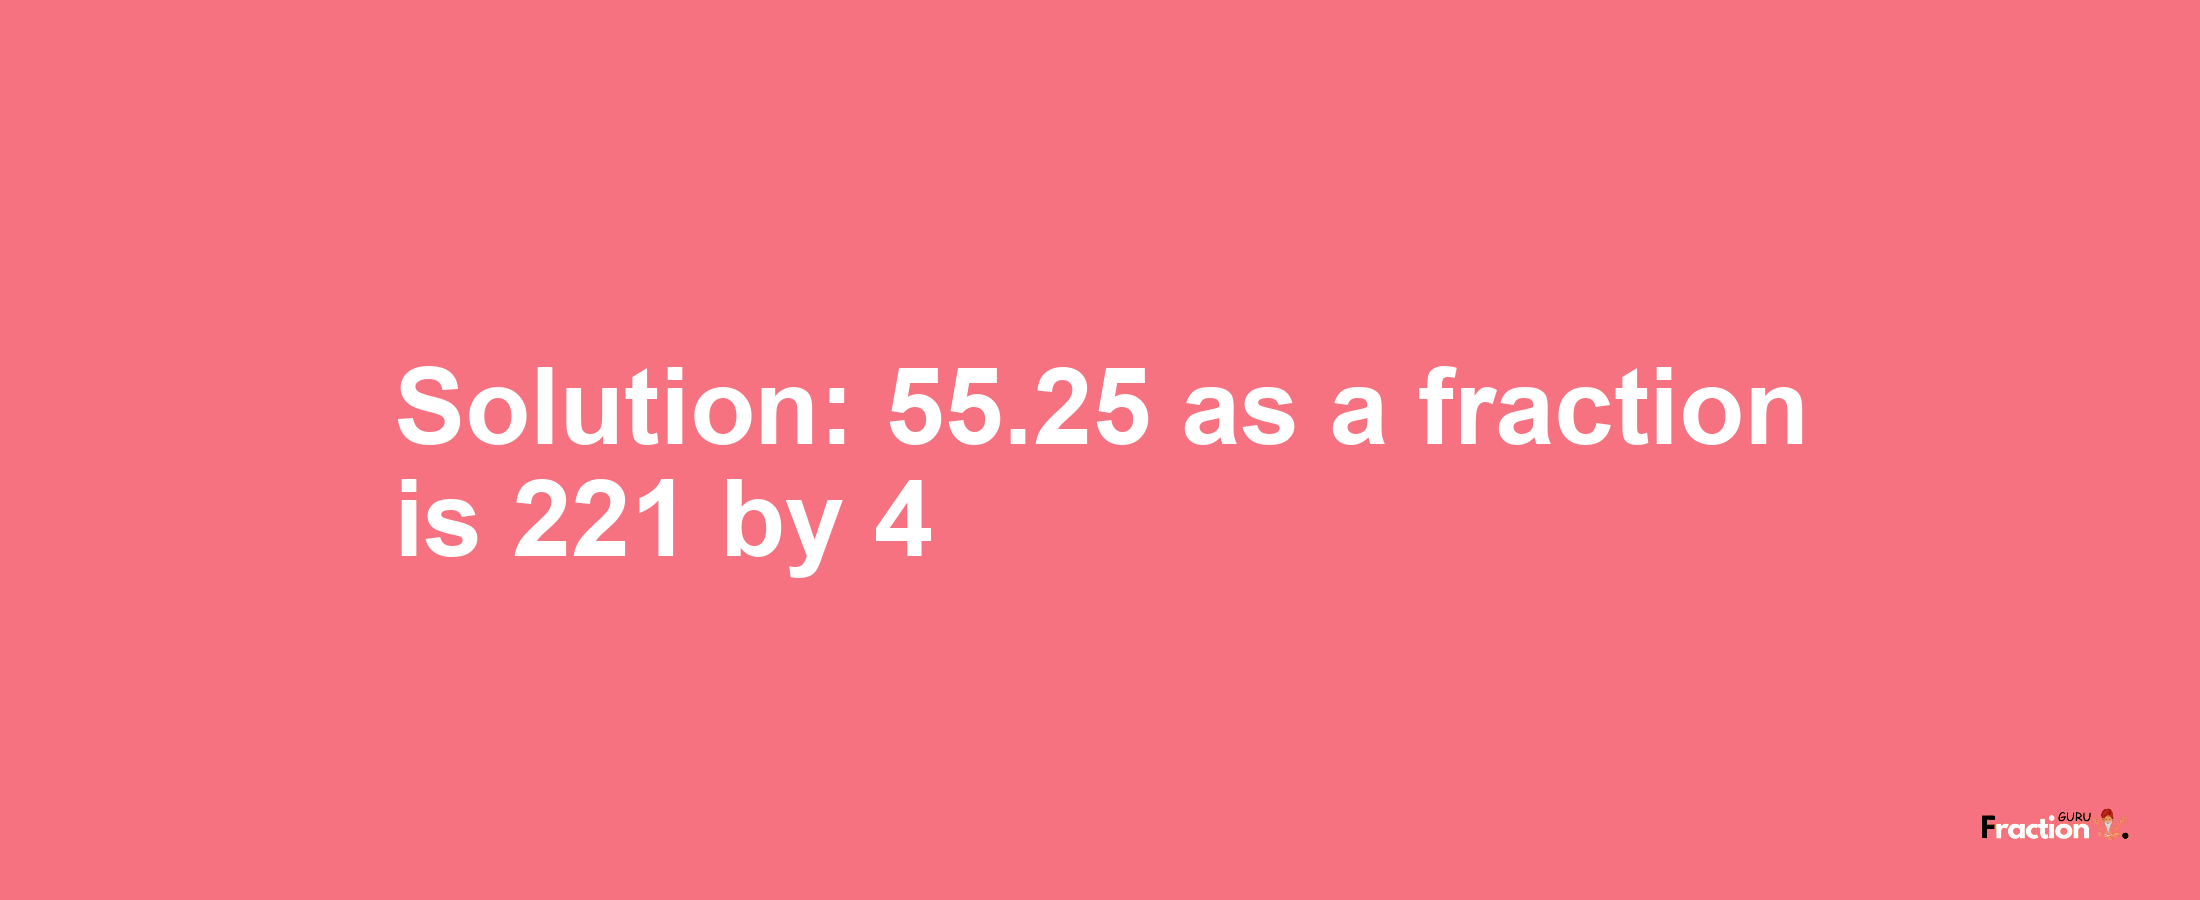 Solution:55.25 as a fraction is 221/4